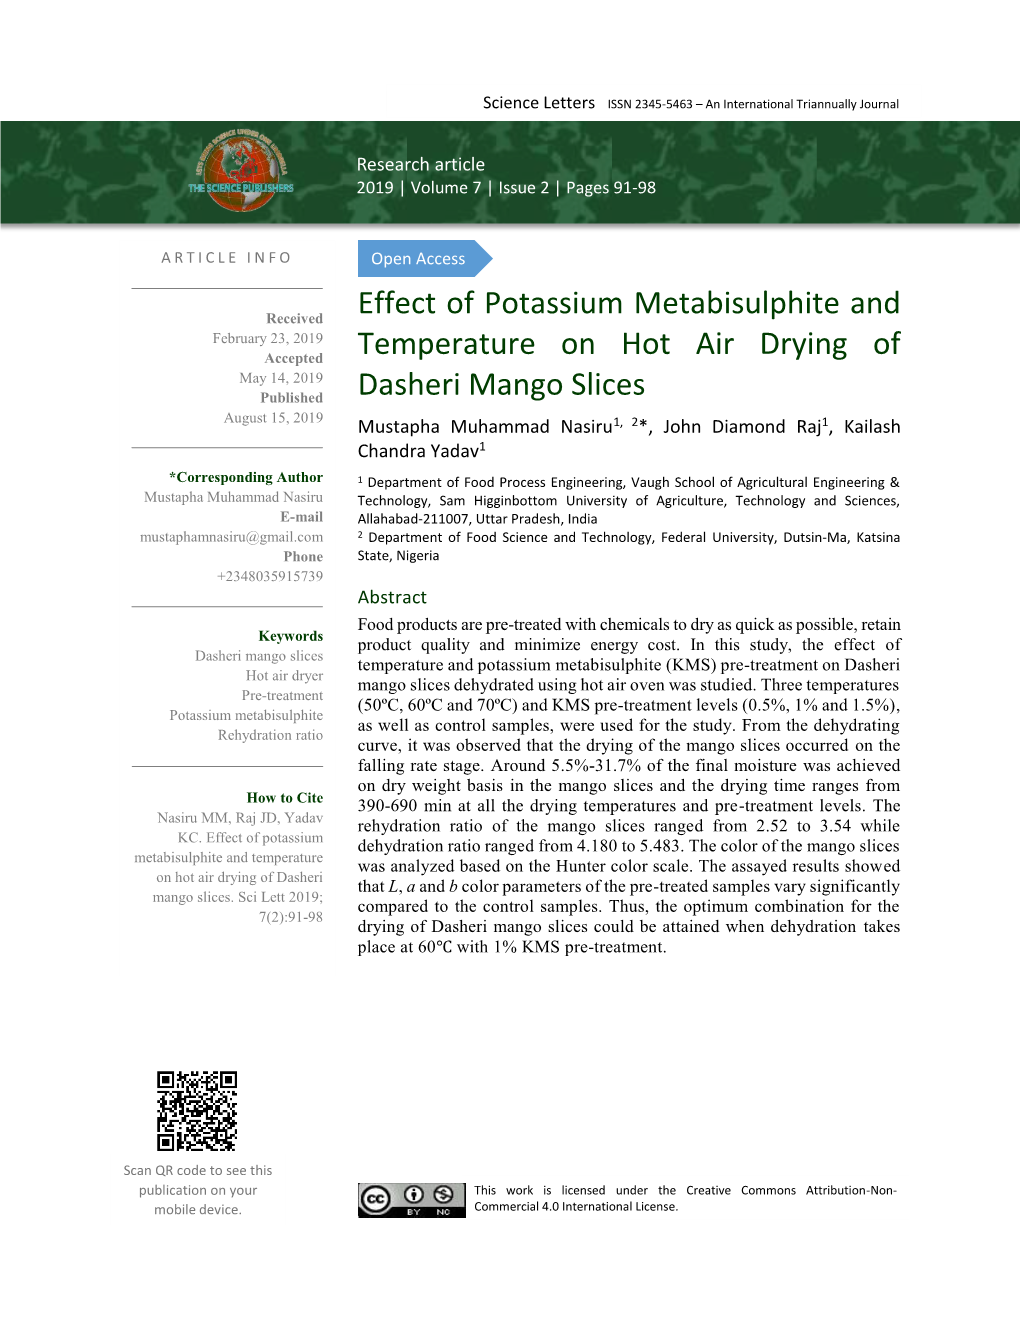 Effect of Potassium Metabisulphite and Temperature on Hot Air Drying of Dasheri Mango Slices